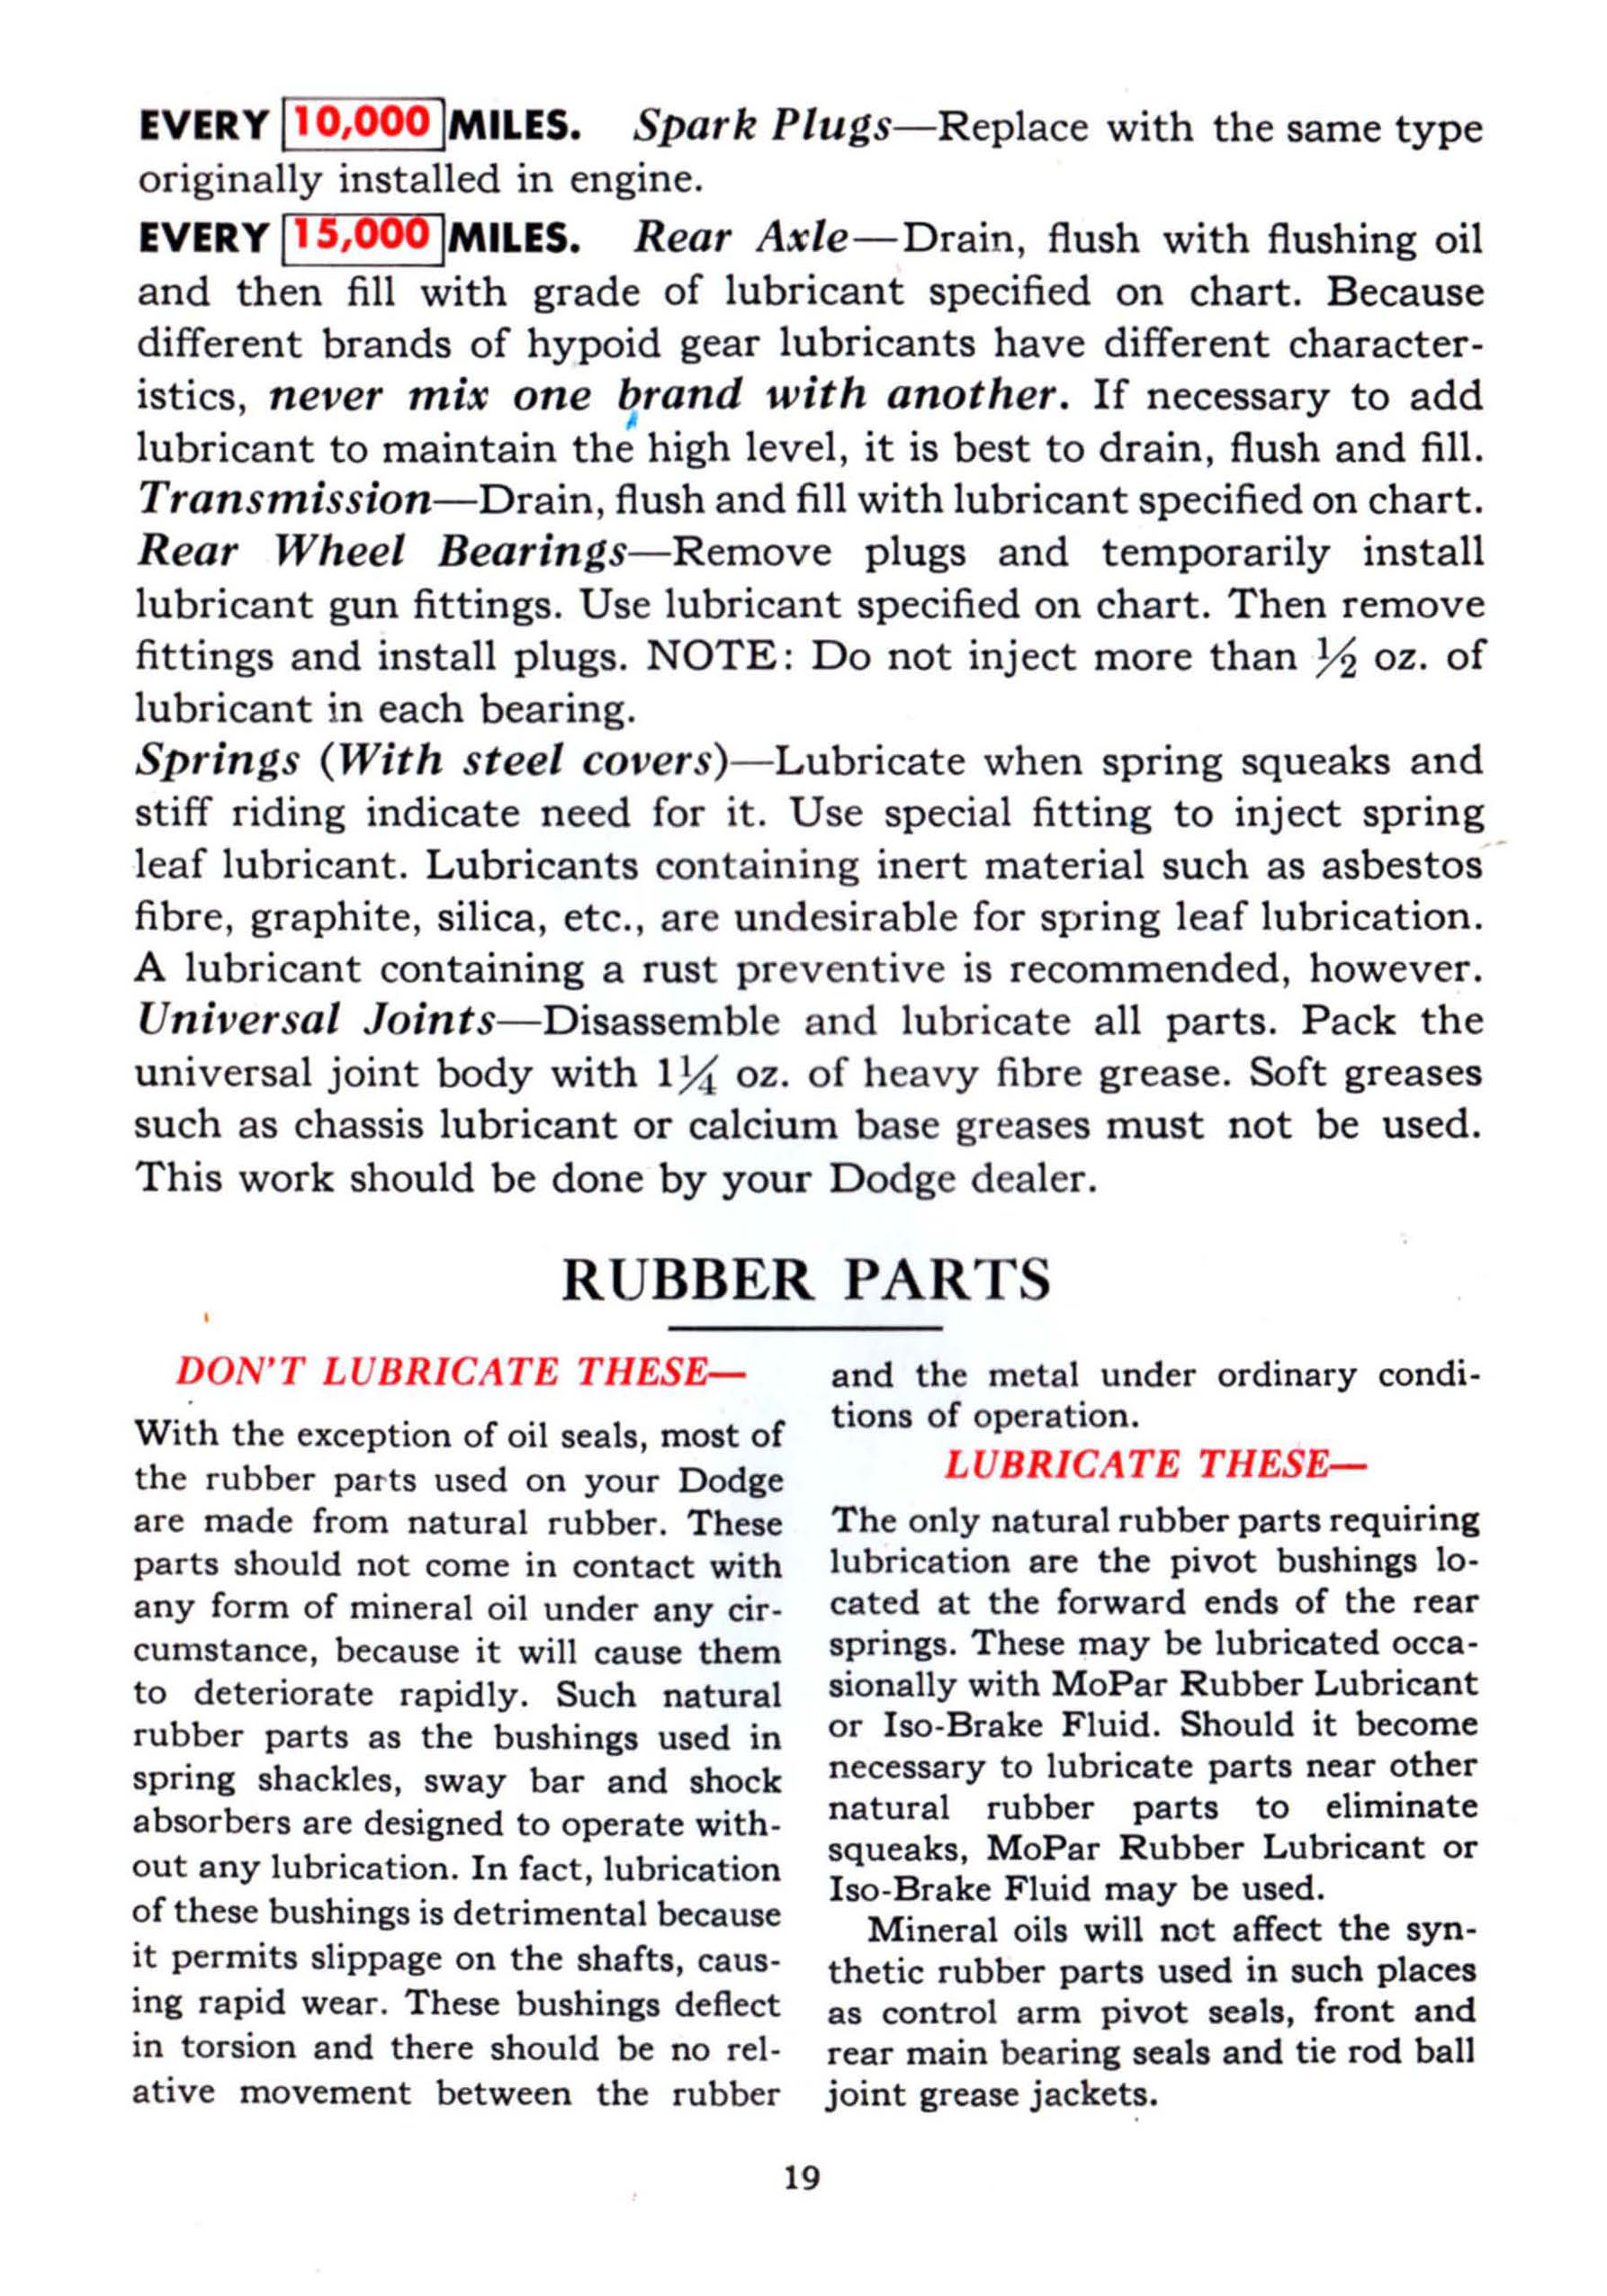 1941_Dodge_Owners_Manual-19